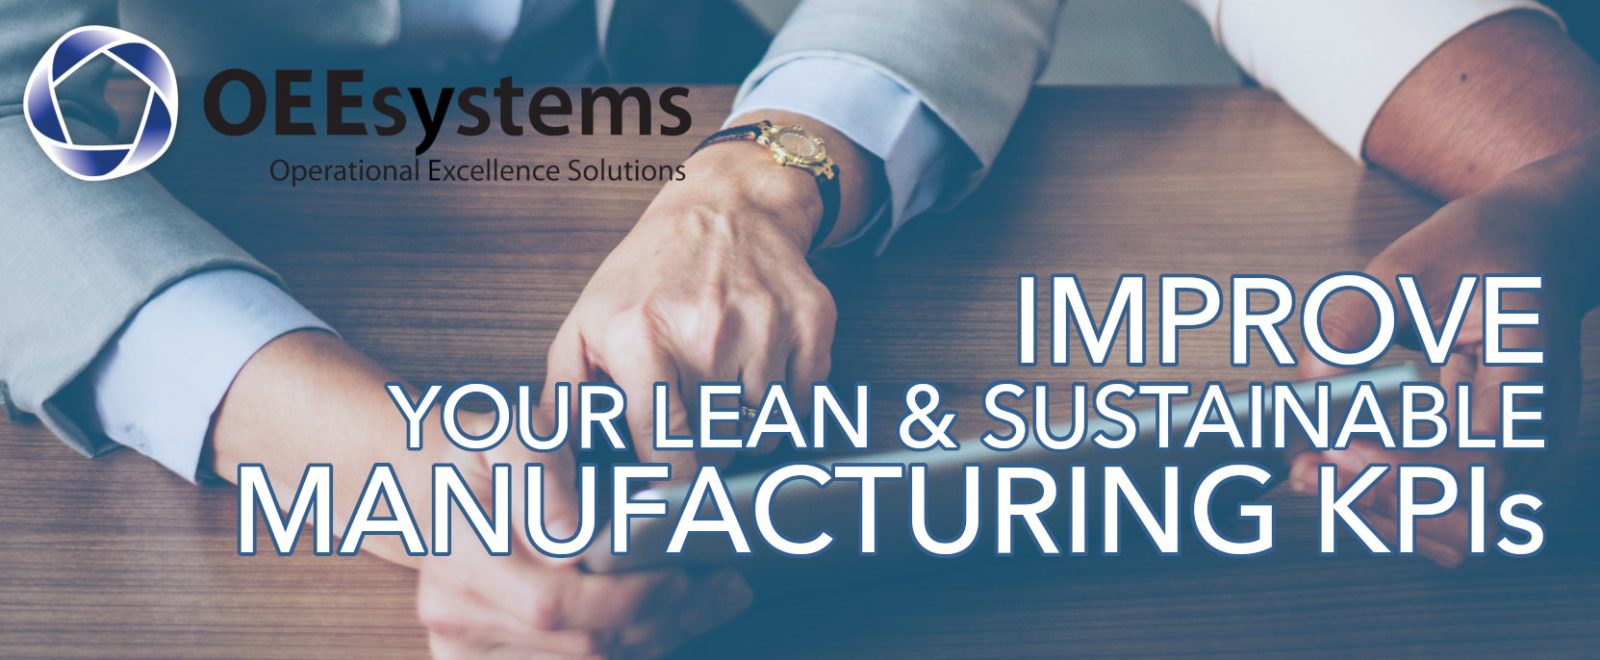 How OEE can help you improve your Lean & Sustainable Manufacturing K.P.I.’s | OEEsystems